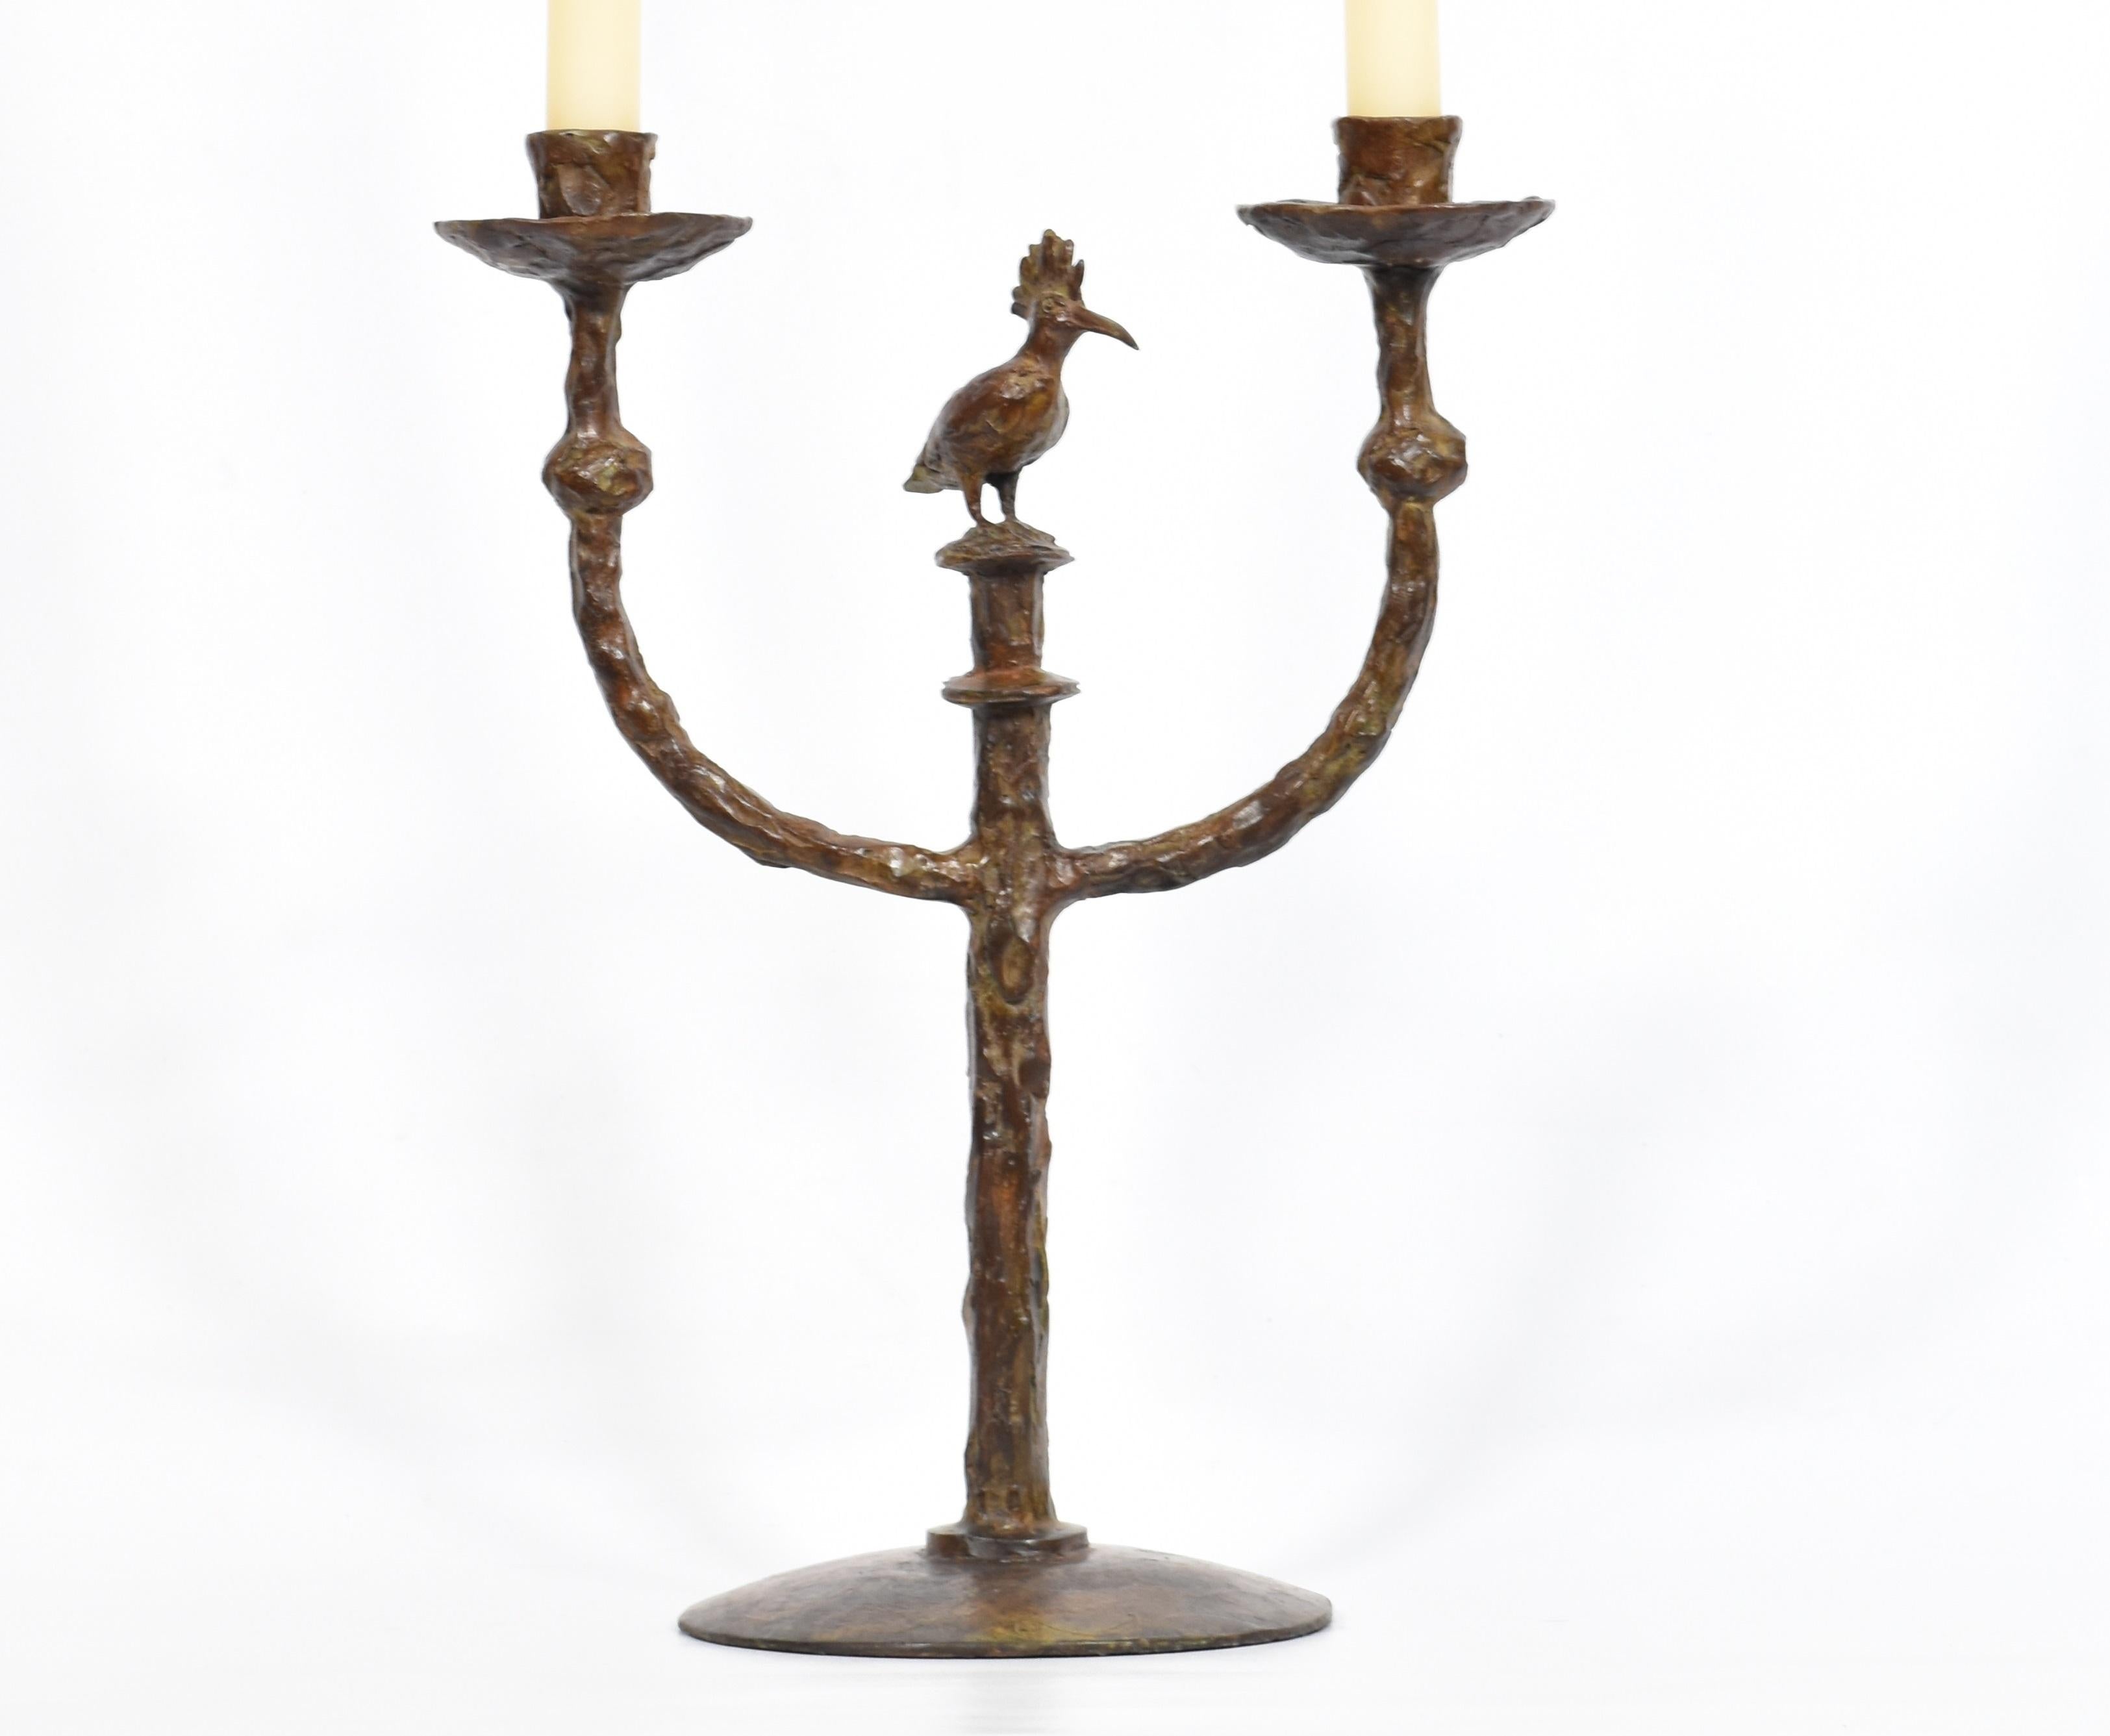 Candlestick in cast bronze
Candelabra in cast bronze featuring a Hoopoe* which is a beautiful little African bird. Hand crafted and unique candlestick in cast bronze. Height excluding candles is 42 cm. Candles not provided. Similar bronze single and